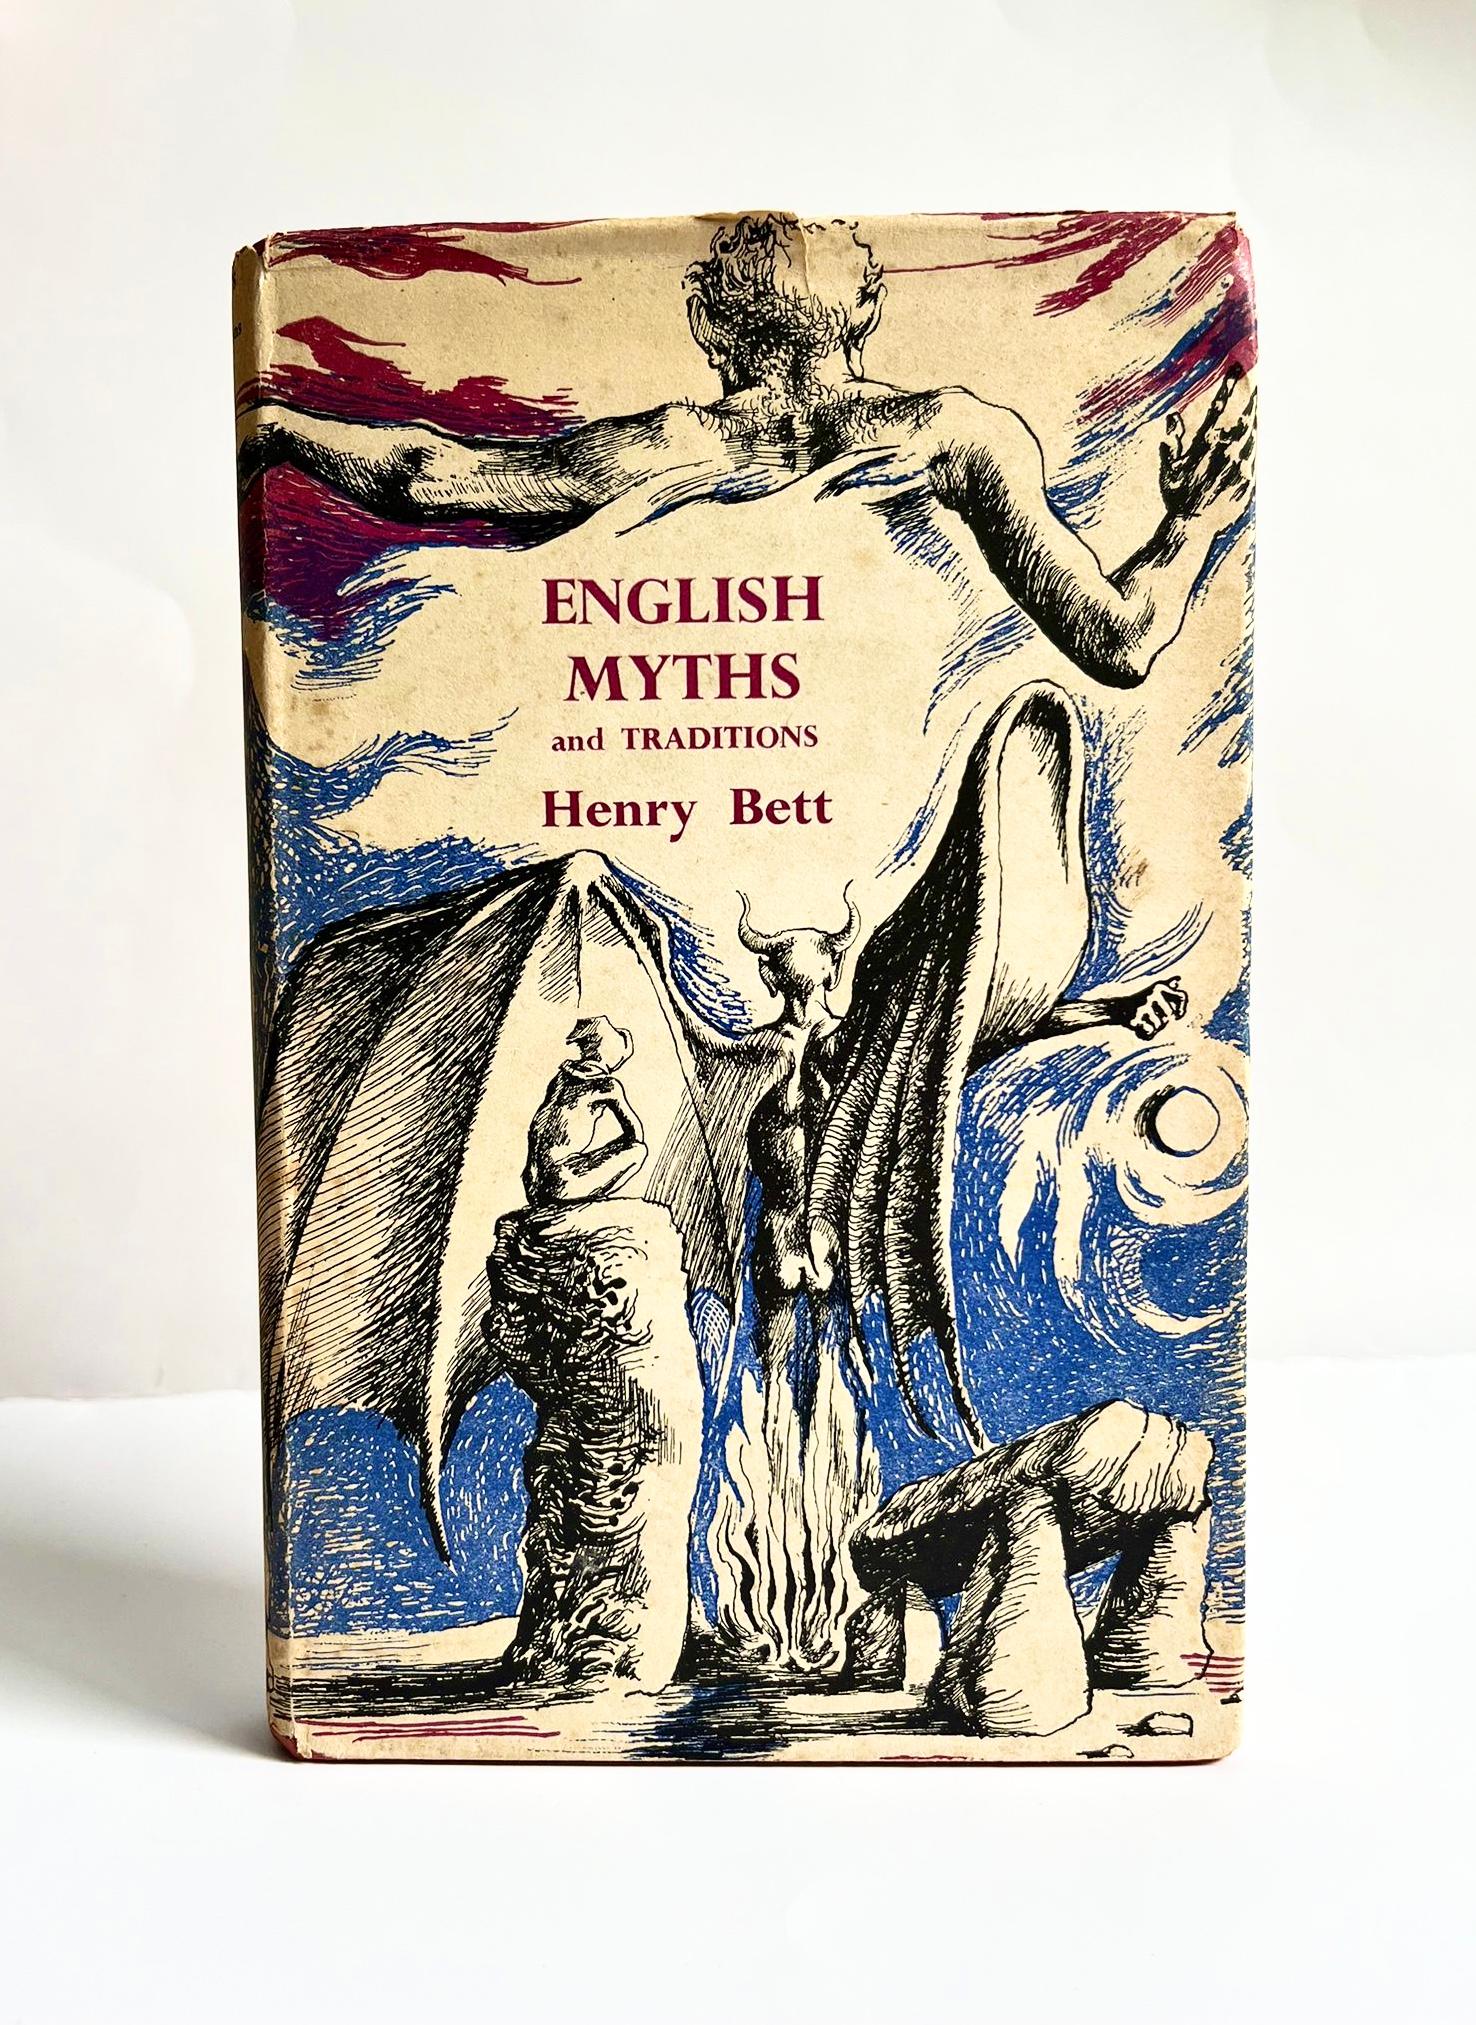 English Myths & Traditions by Henry Bett